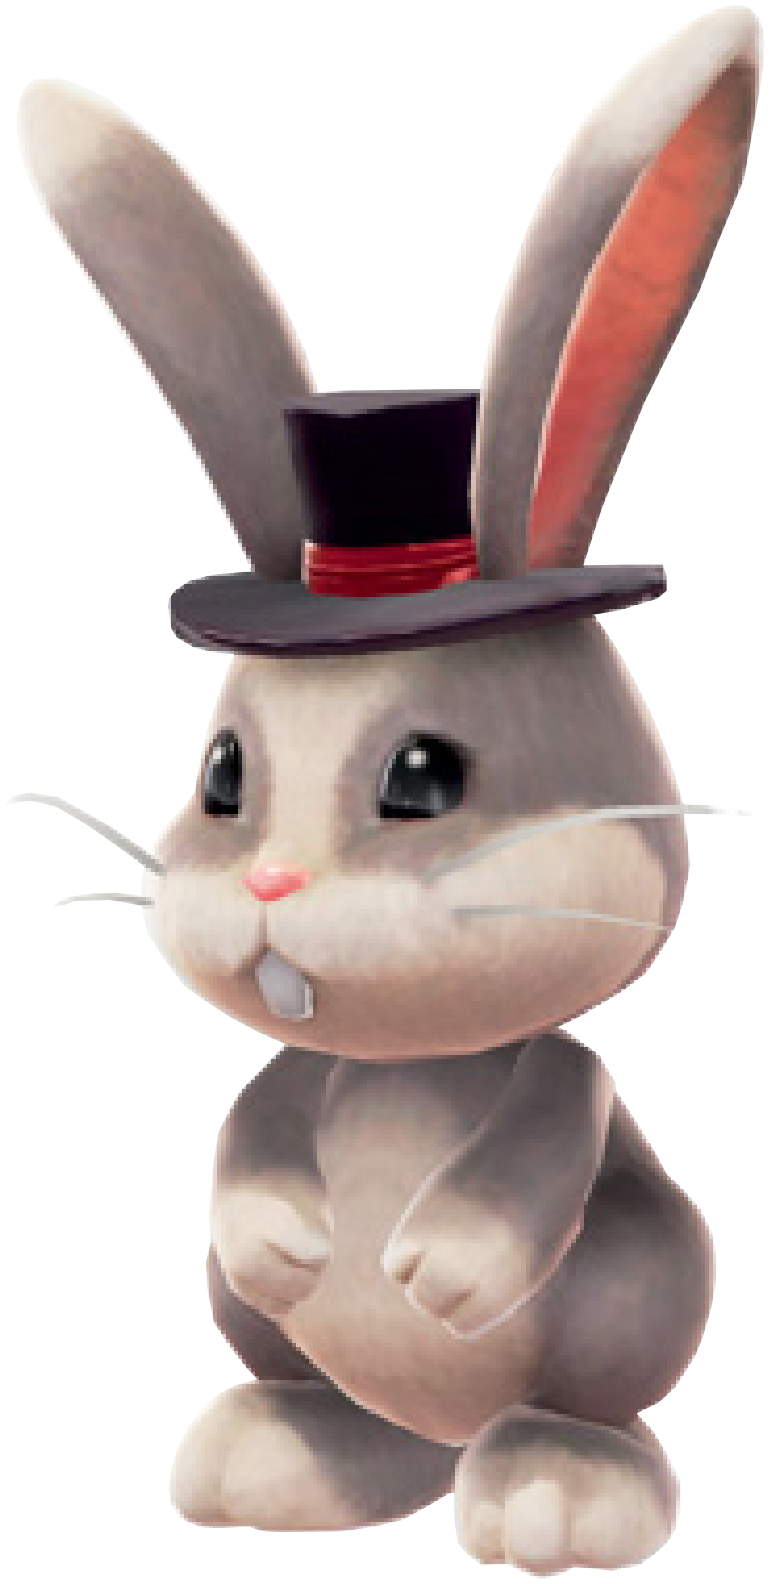 Is the Order a Rabbit? - Wikipedia